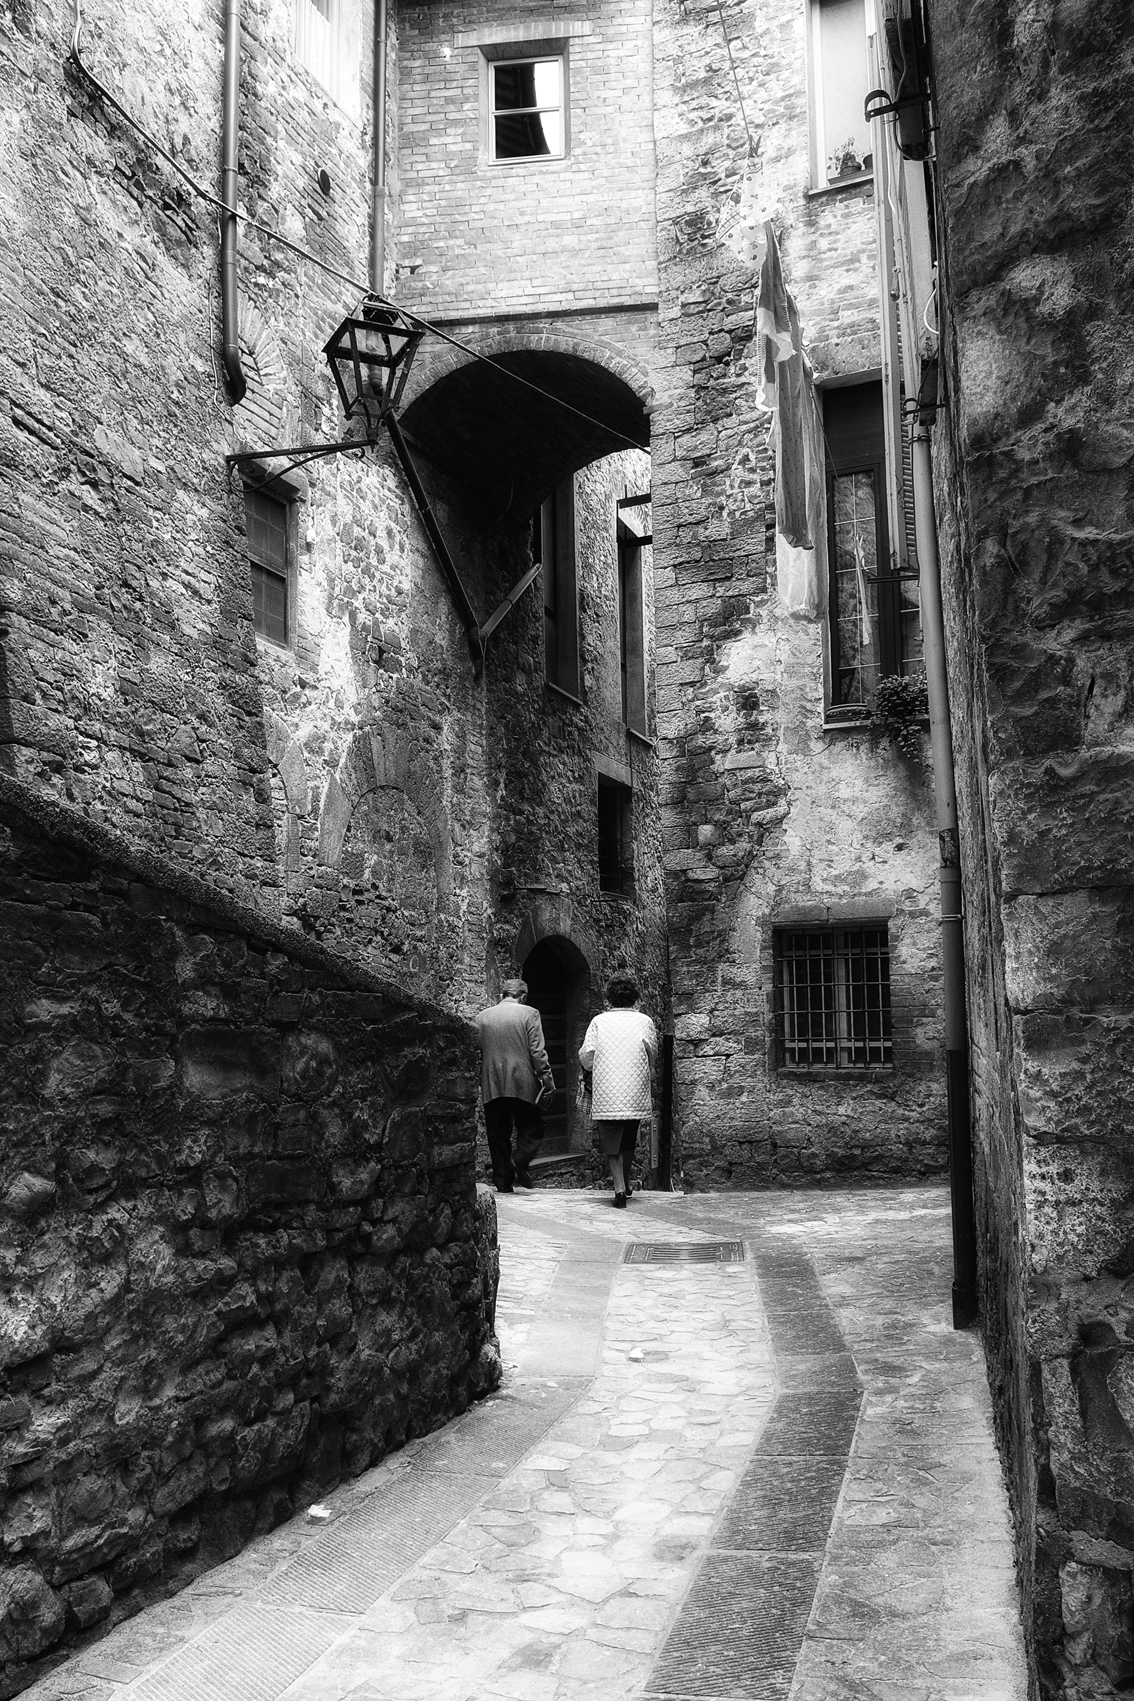 For the alleys of Todi...